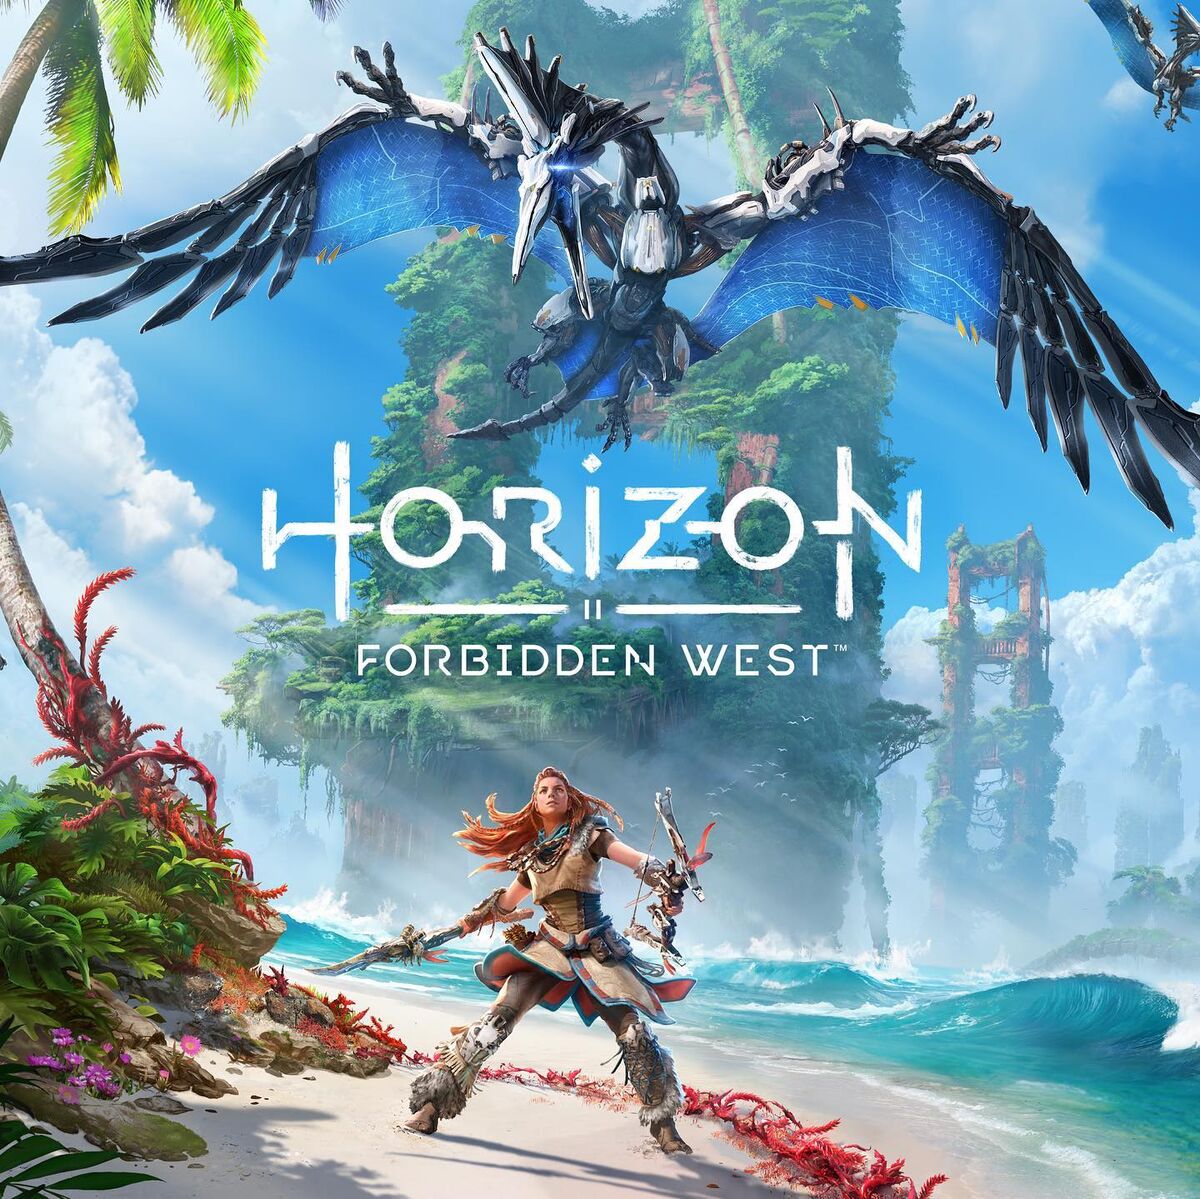 PlayStation Video Game Horizon Forbidden West Delayed To 2022 - Bloomberg